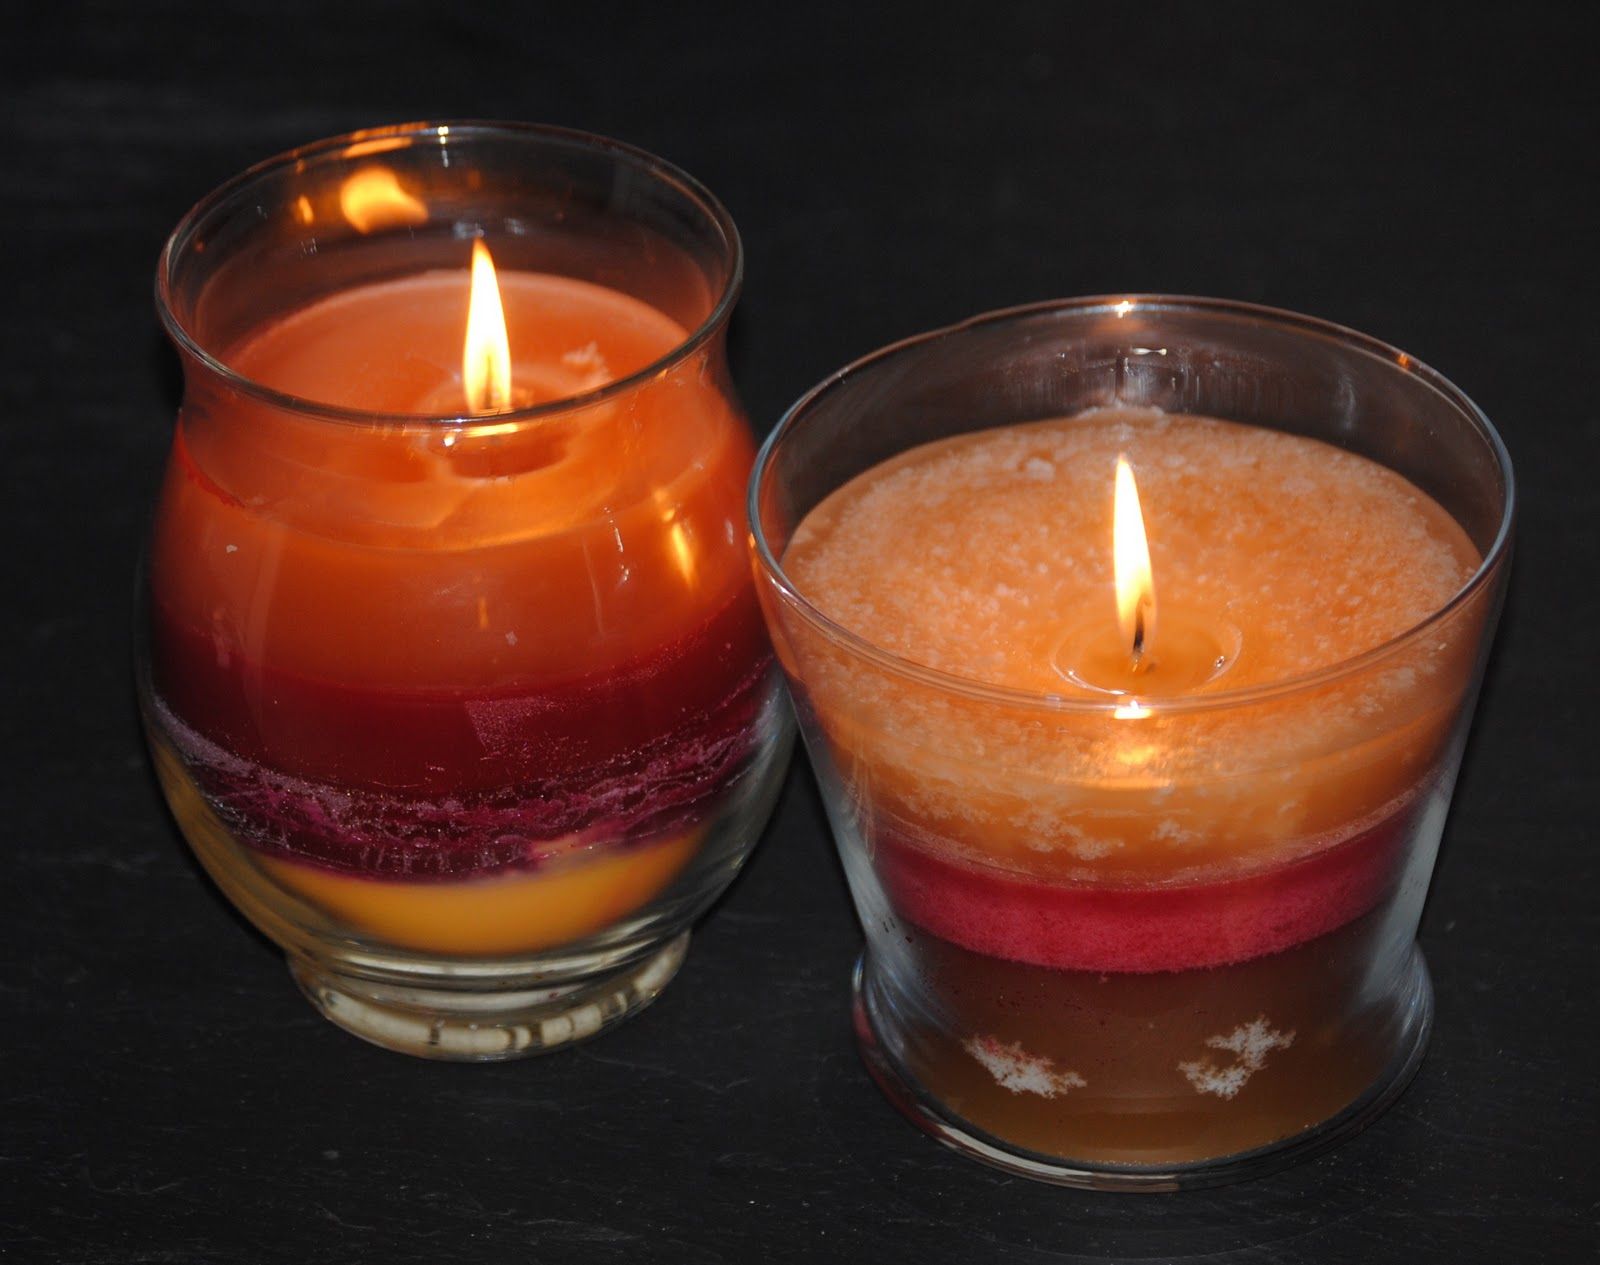 How To Make A Candle From Old Candles